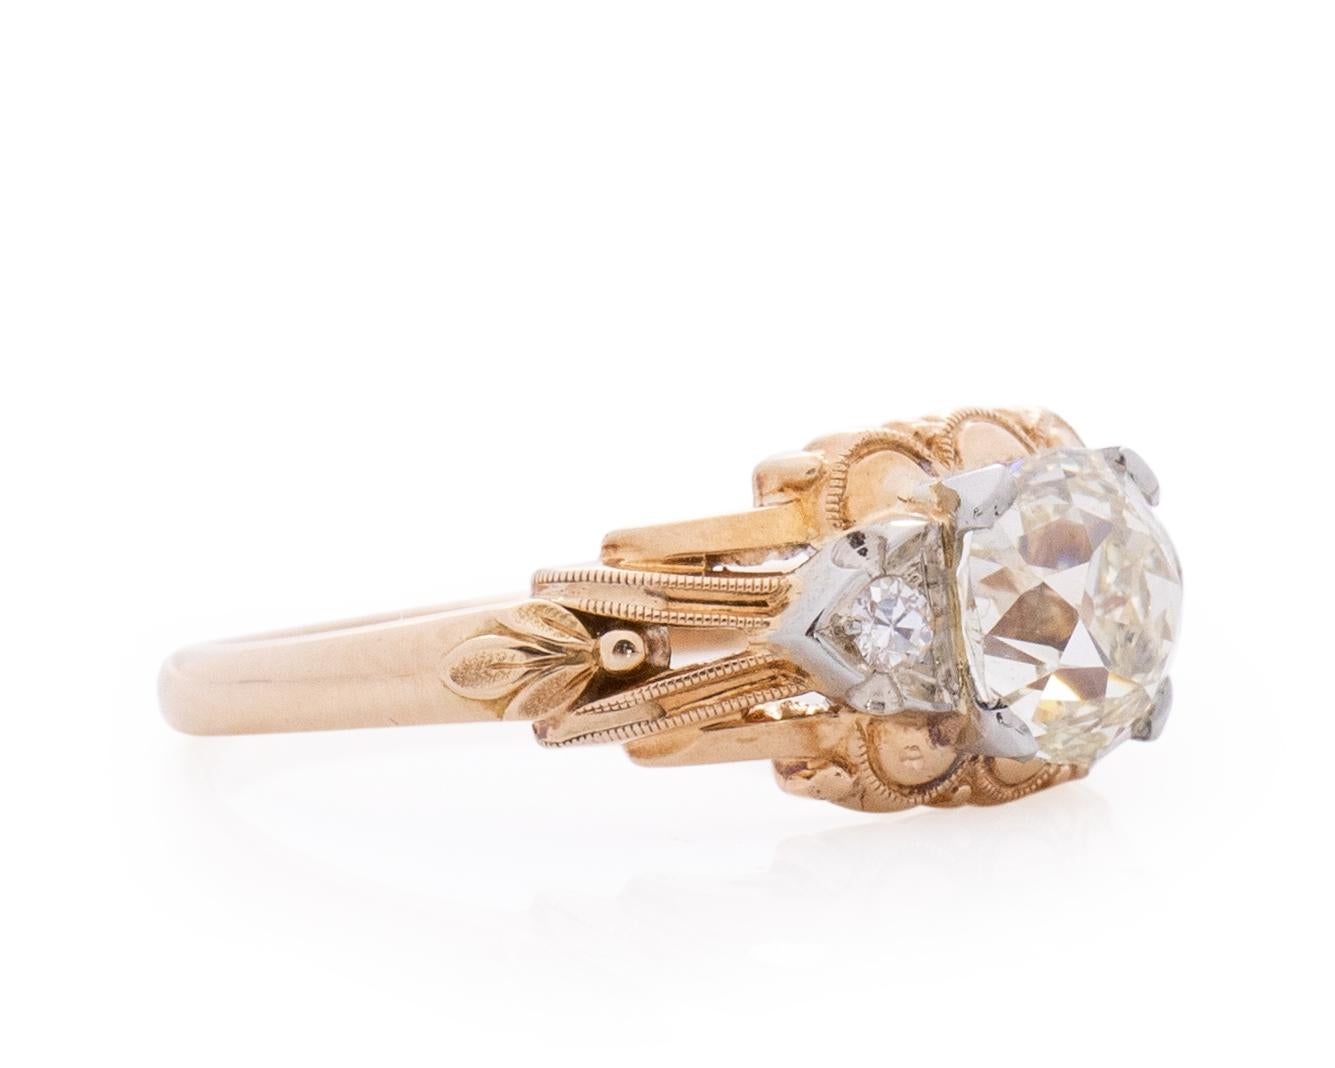 Item Details: 
Ring Size: 4.5
Metal Type: 14 Karat Yellow Gold [Hallmarked, and Tested]
Weight: 3.0 grams

Center Diamond Details:
GIA REPORT #: 5201532135
Weight: 1.01
Cut: Antique Cushion
Color: Light Yellow (O-P)
Clarity: SI1
Measurements: 6.04 x